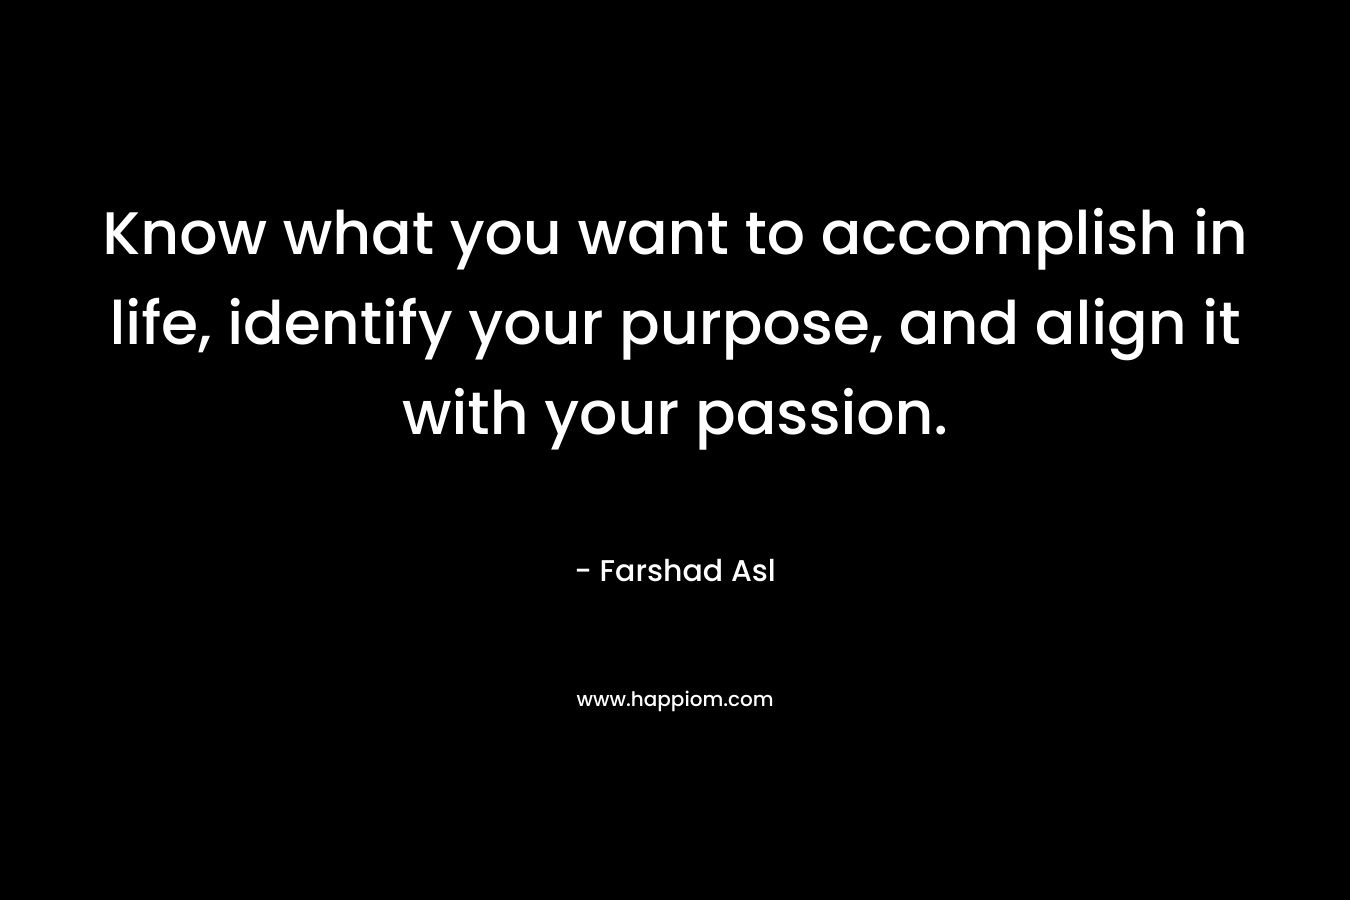 Know what you want to accomplish in life, identify your purpose, and align it with your passion. – Farshad Asl